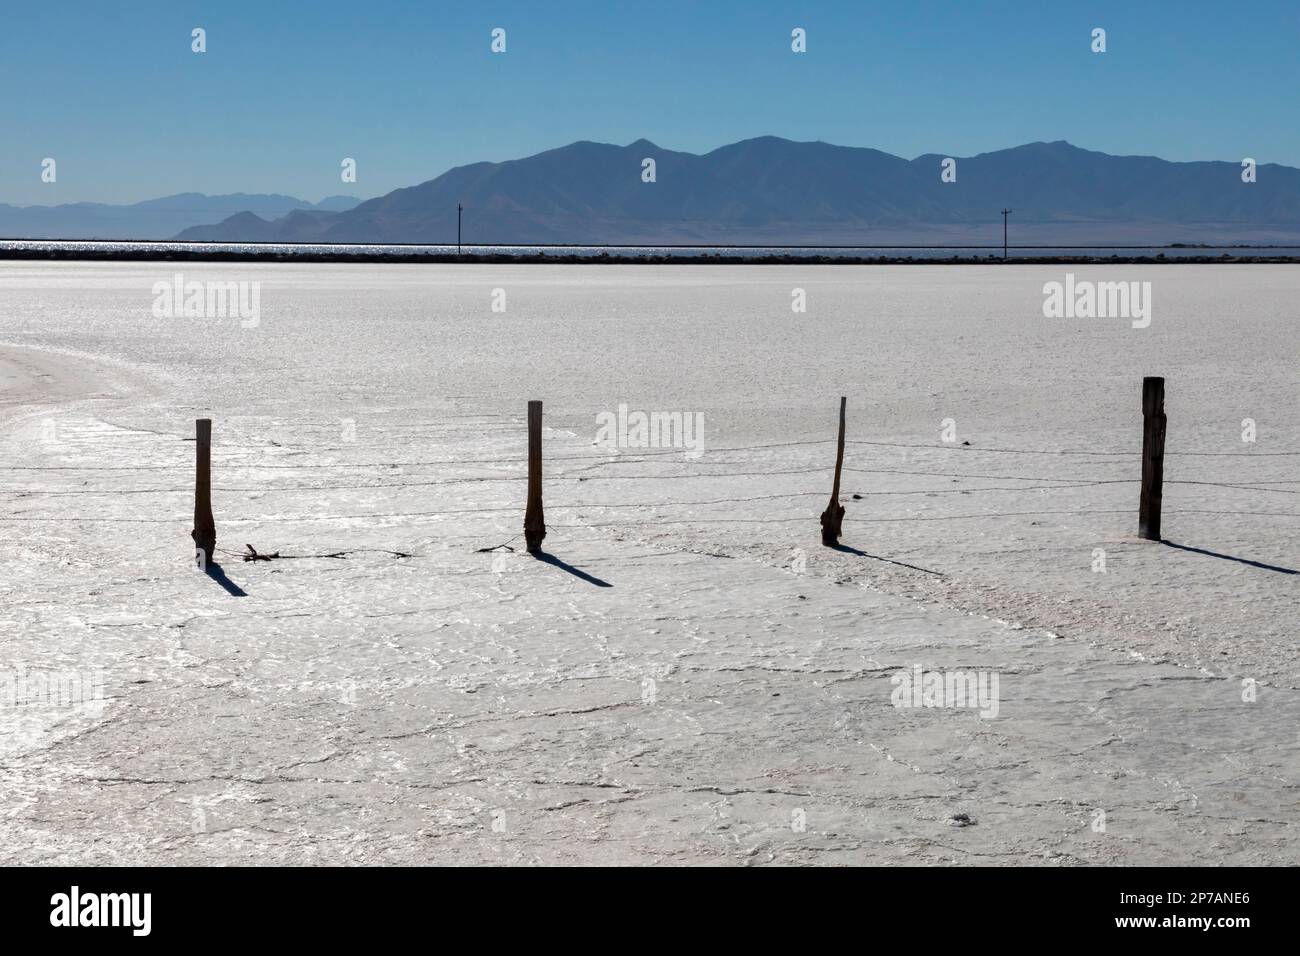 Grantsville, Utah, The Morton Salt facility, where salt is produced by impounding brine in shallow evaporation ponds at the edge of Great Salt Lake. Stock Photo